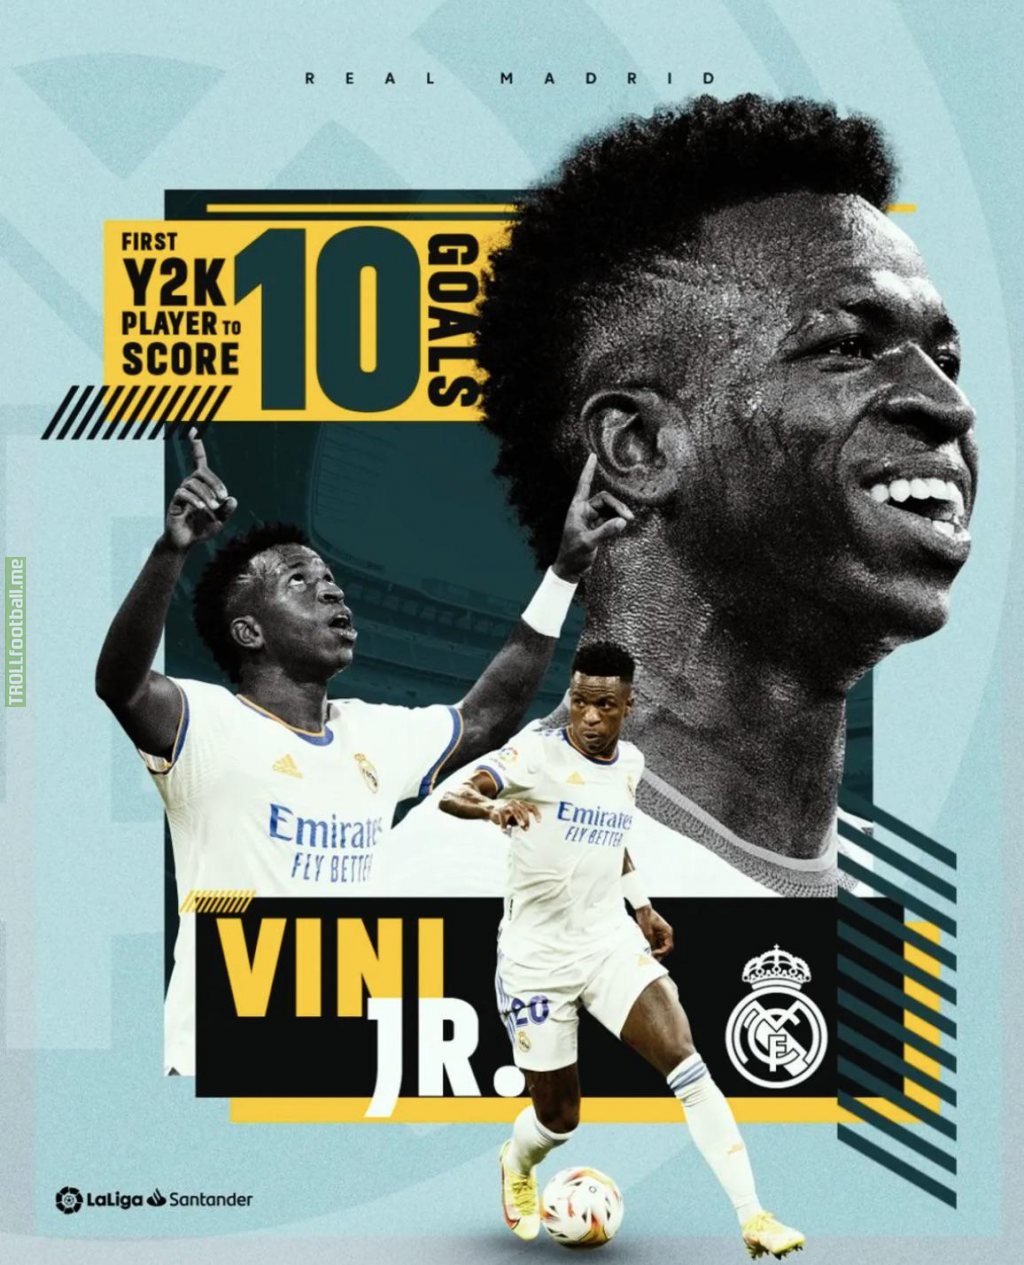 Vinicius Jr. becomes the first player born post-2000 to record double digit goals in La Liga with 10 in 16 appearances as of now.